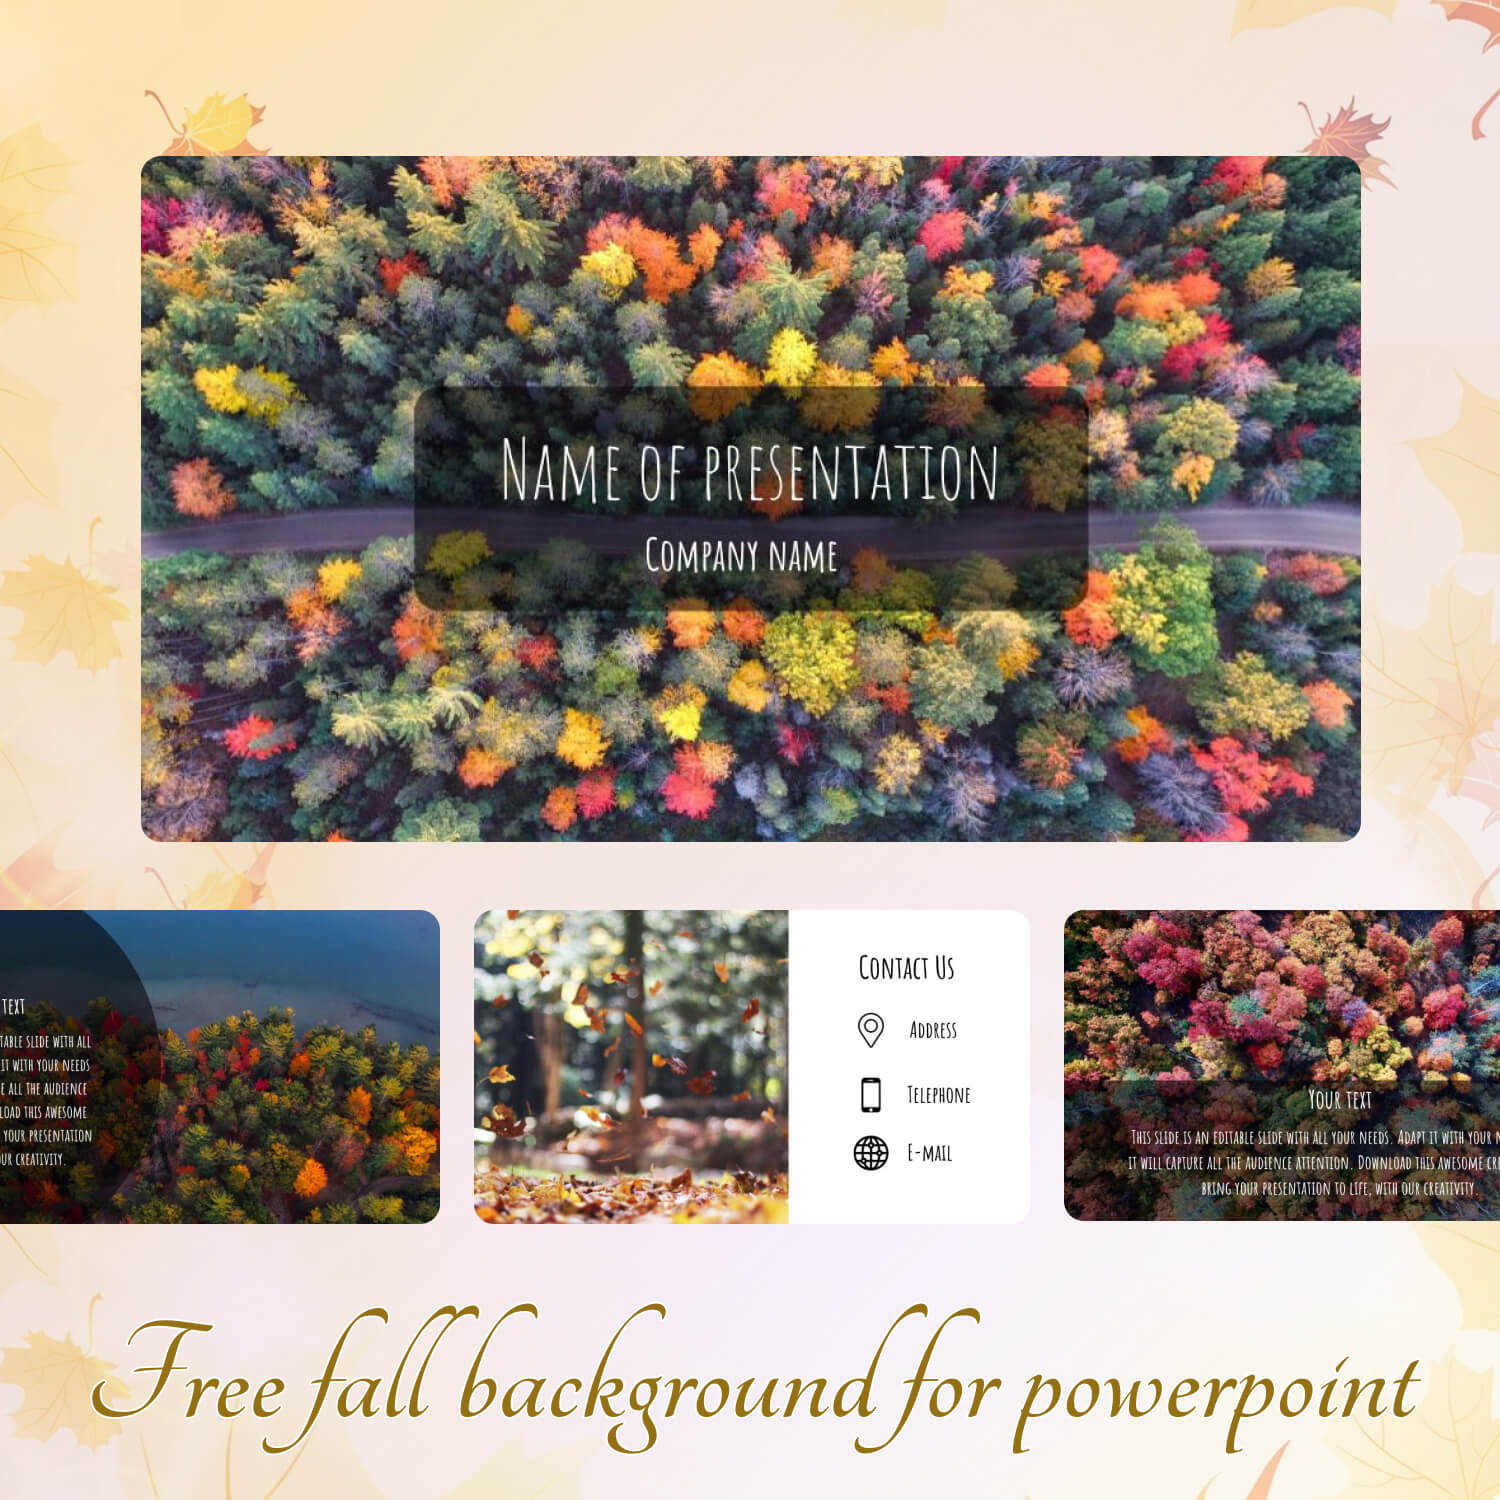 Free Fall Background For Powerpoint.